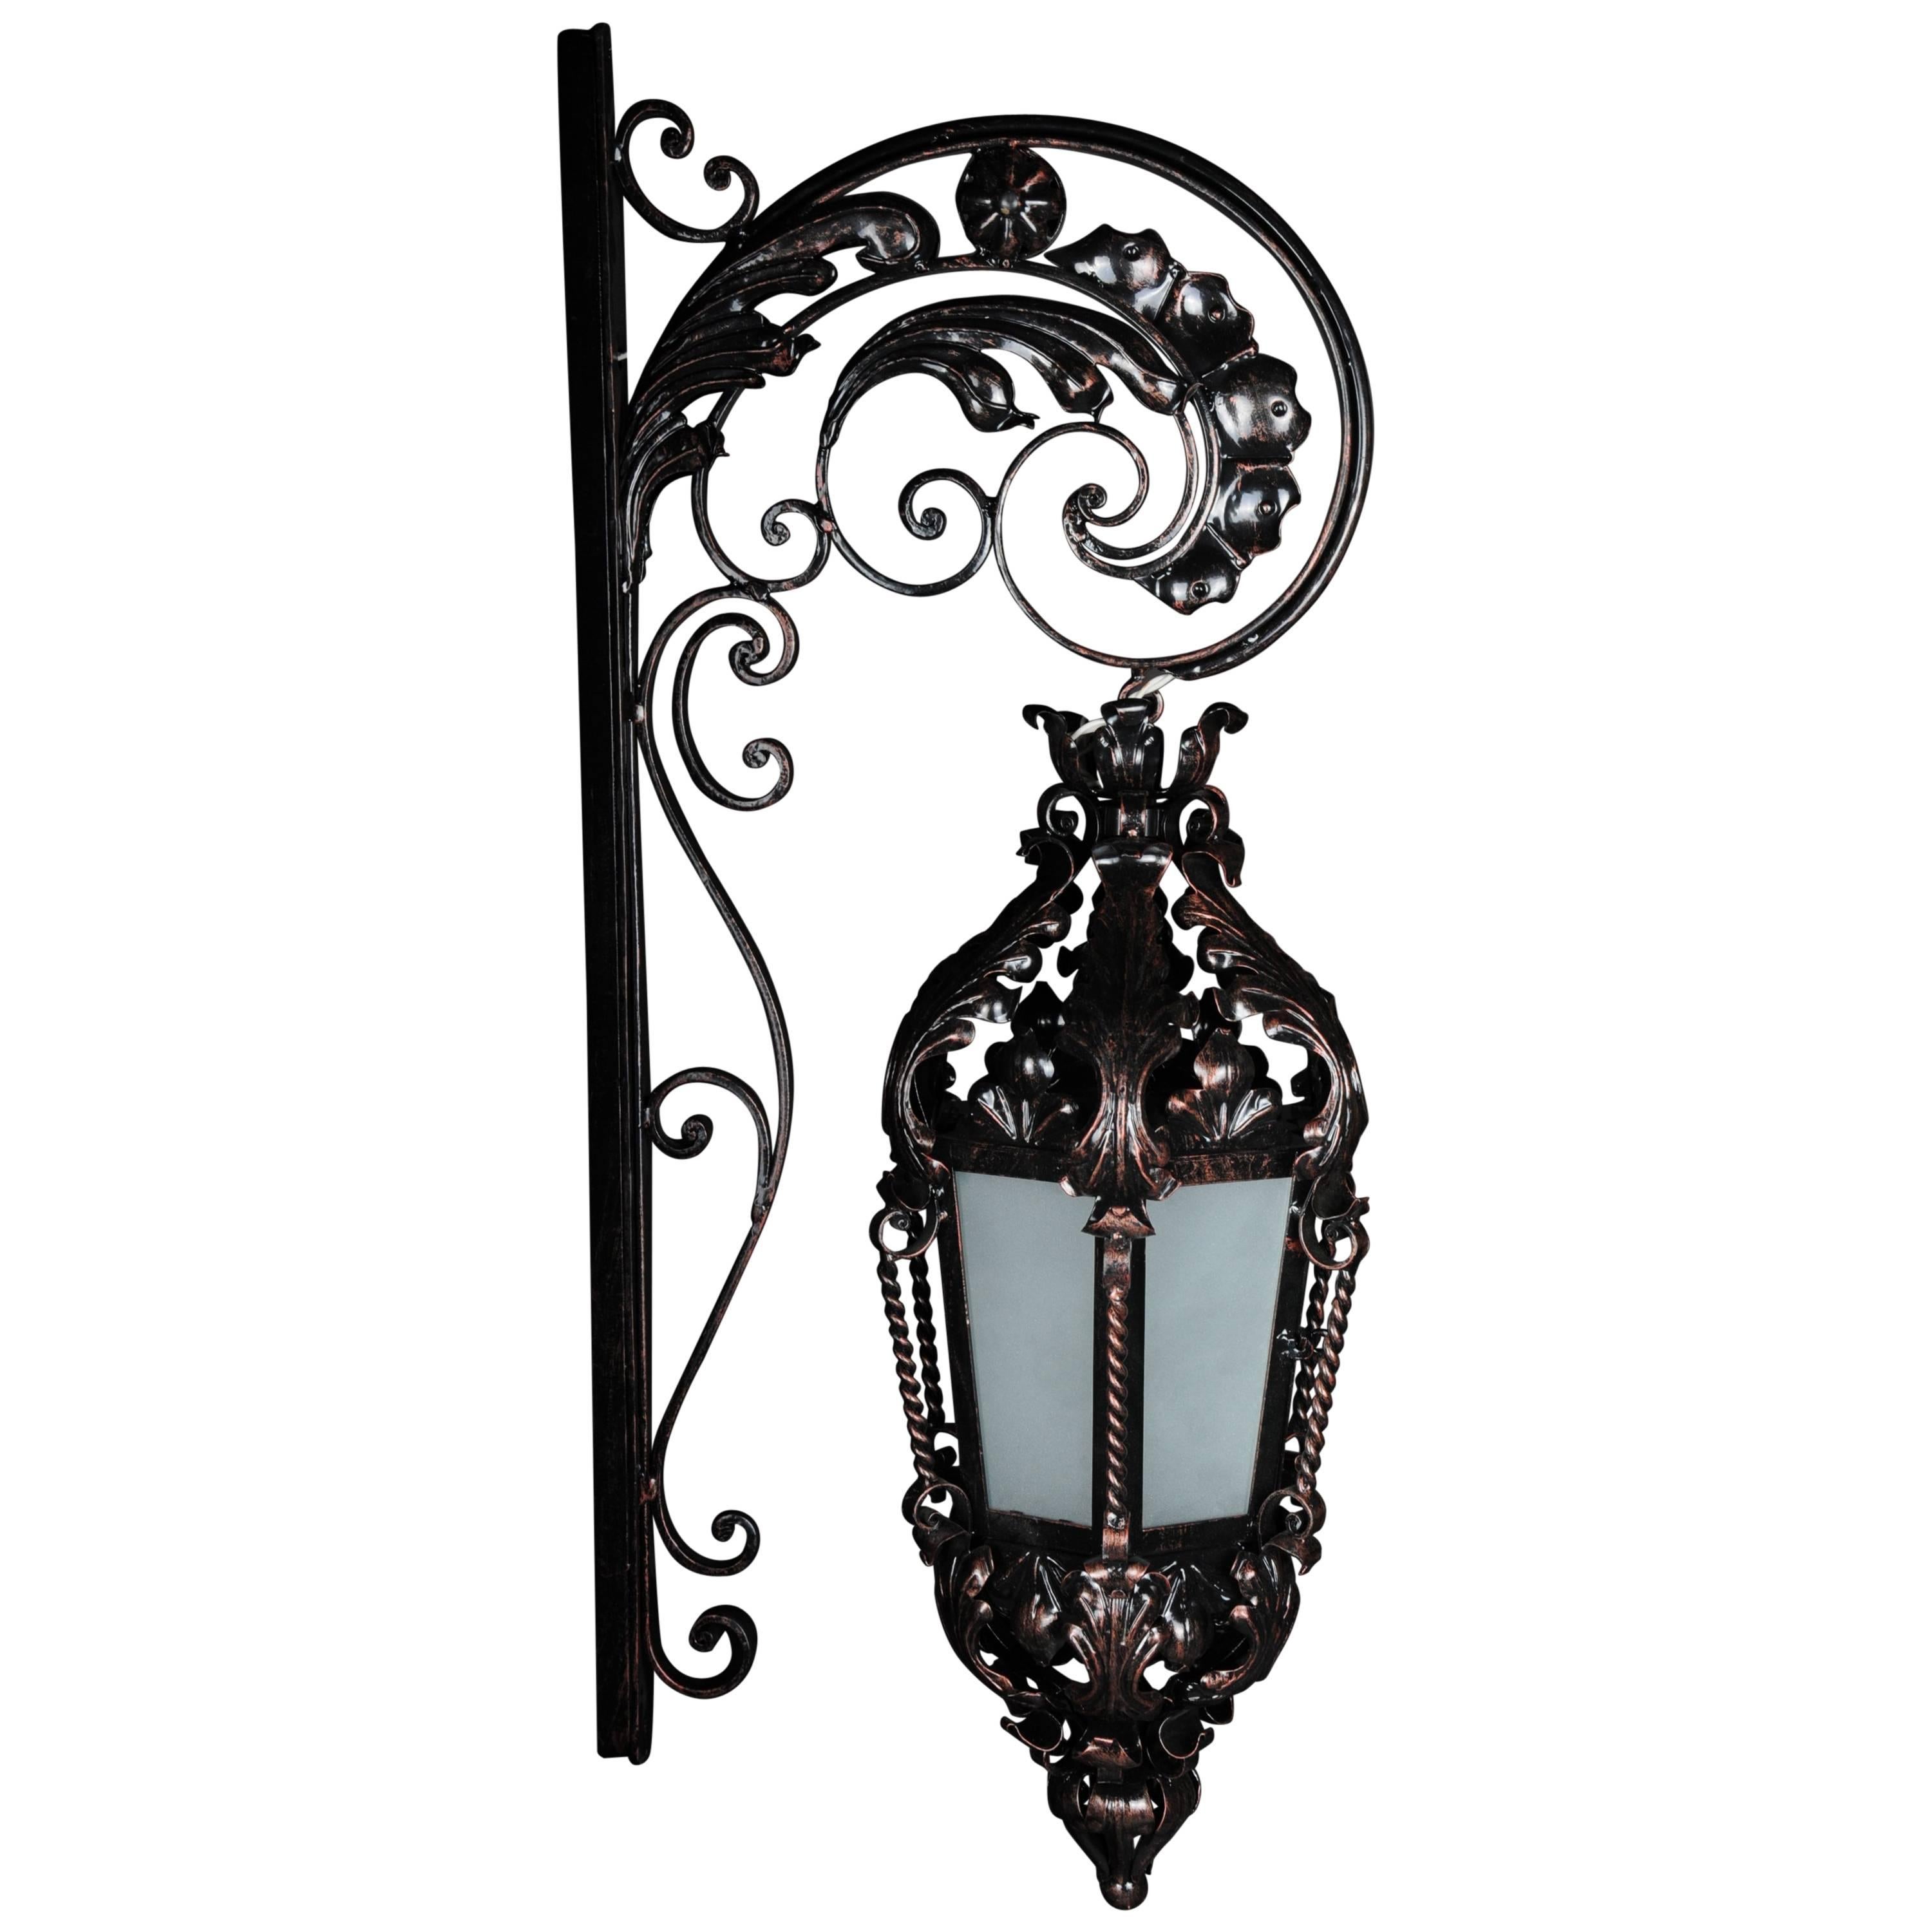 Unique Wrought Iron Hanging Lantern Wall Lamp, Historicism